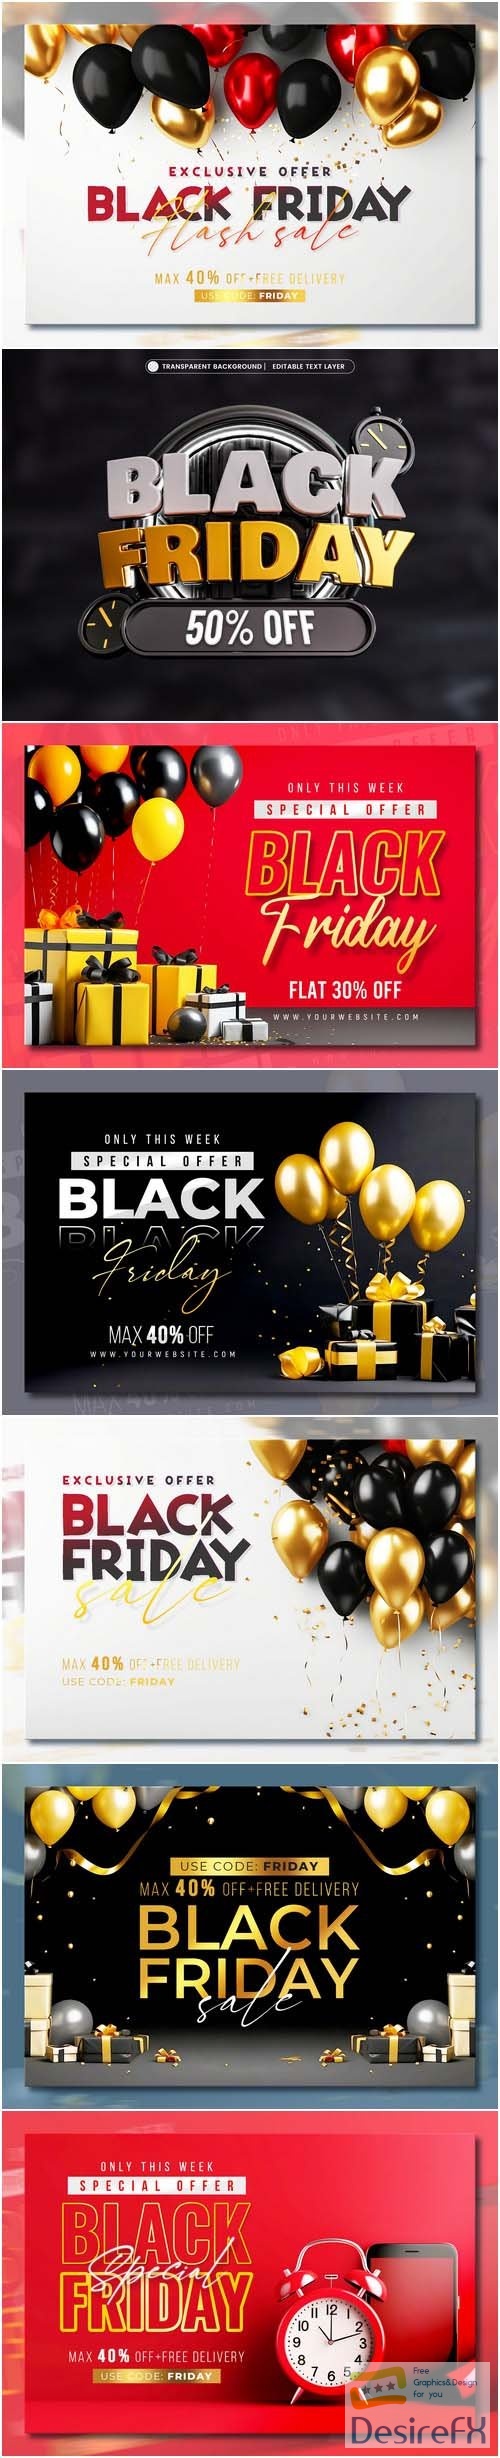 Black friday sale banner with realistic 3d gifts and balloons in psd vol 7